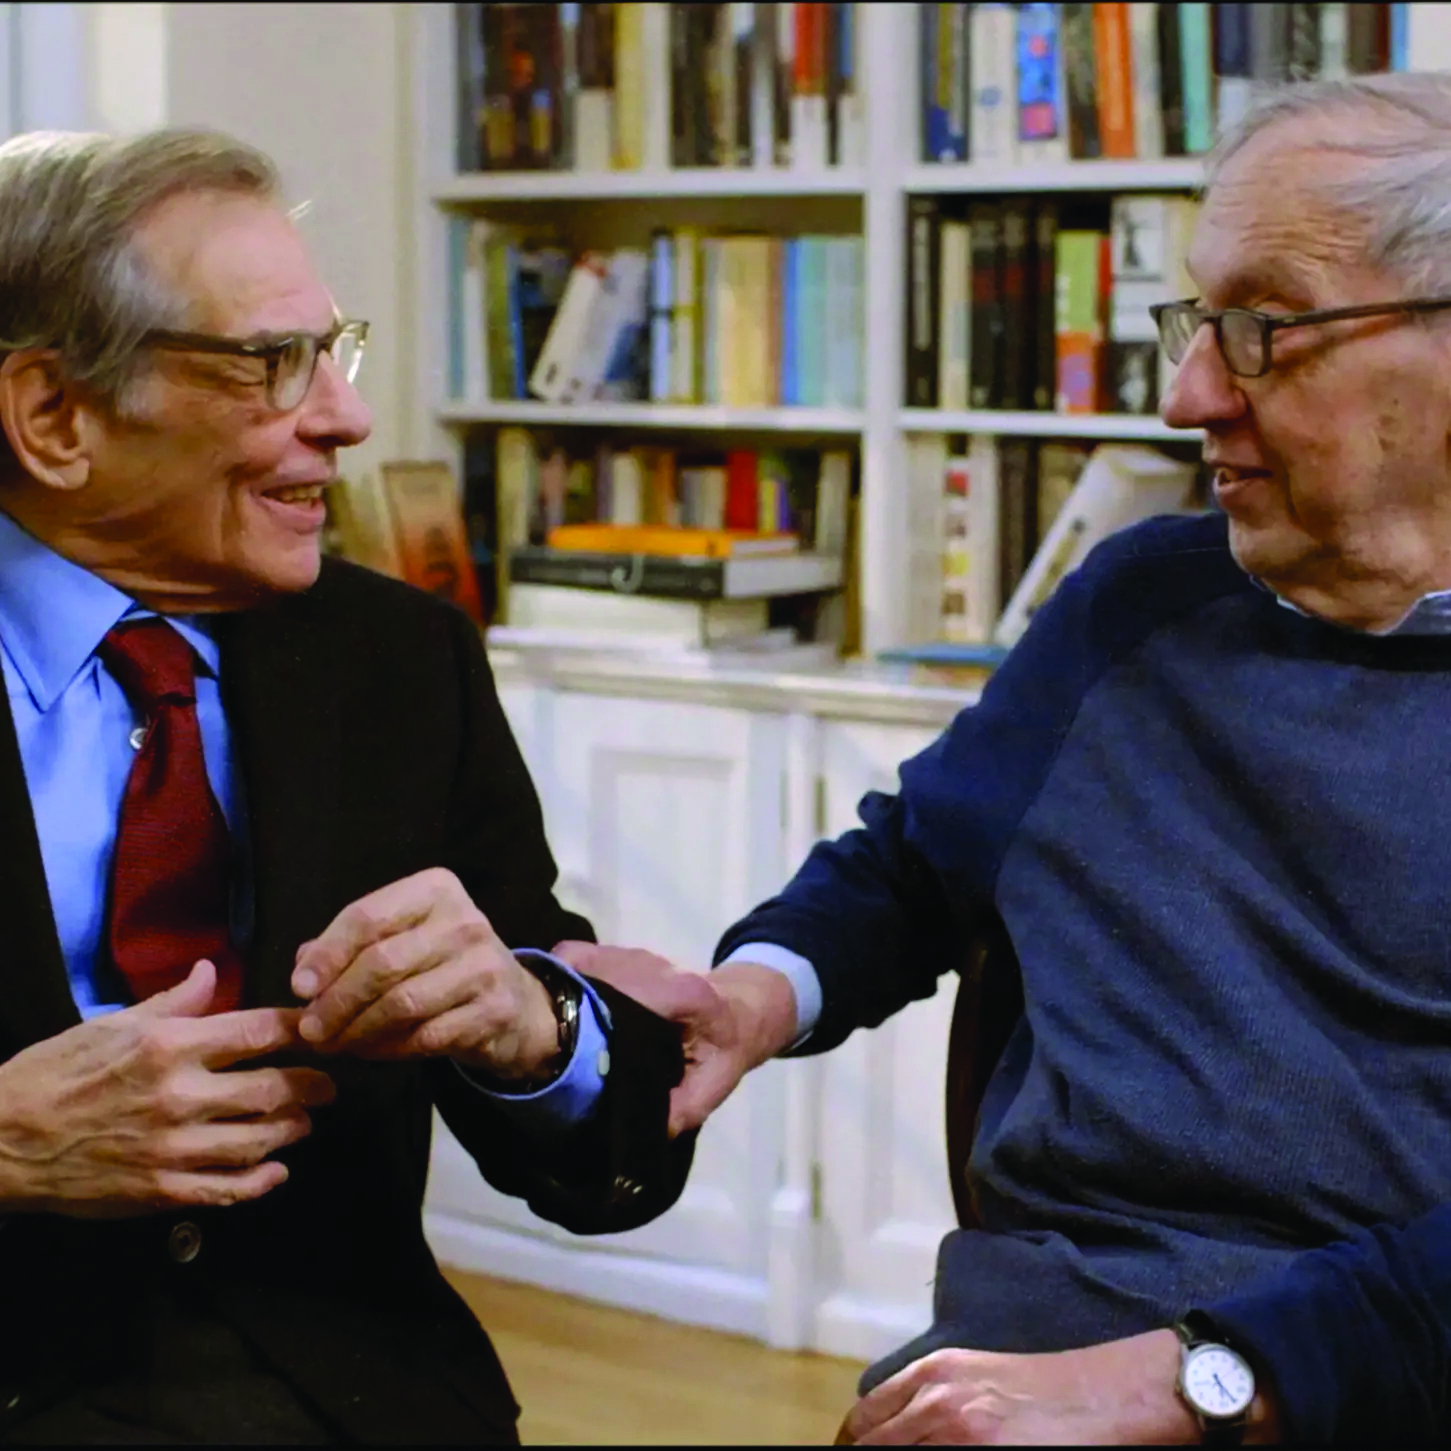 “Turn Every Page: The Adventures of Robert Caro and Robert Gottlieb” will screen on December 4 and features a Q&A with Caro and the film's director, Gottlieb’s daughter Lizzie Gottlieb. SONY PICTURES CLASSICS